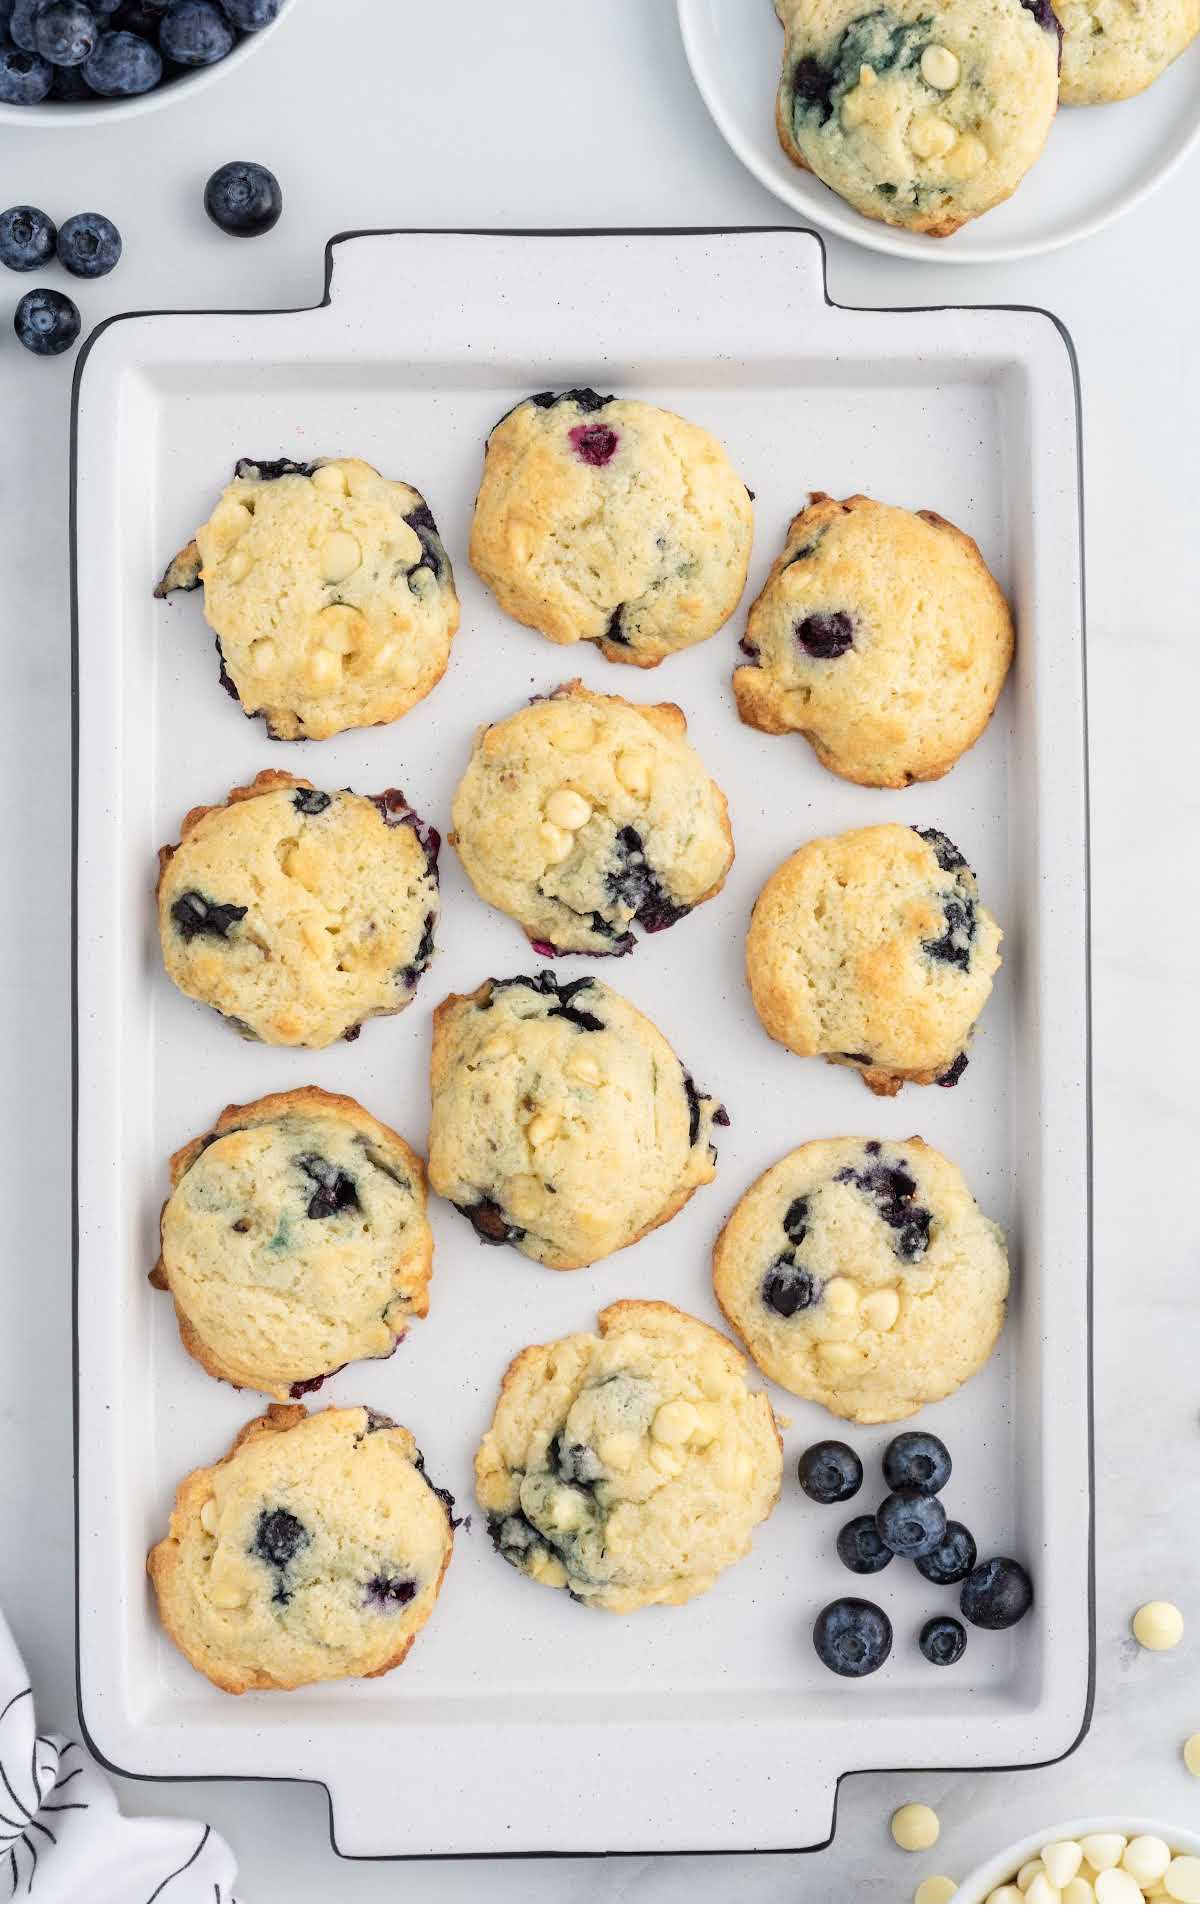 A box filled with different types of food on a plate, with Cookie and Blueberry